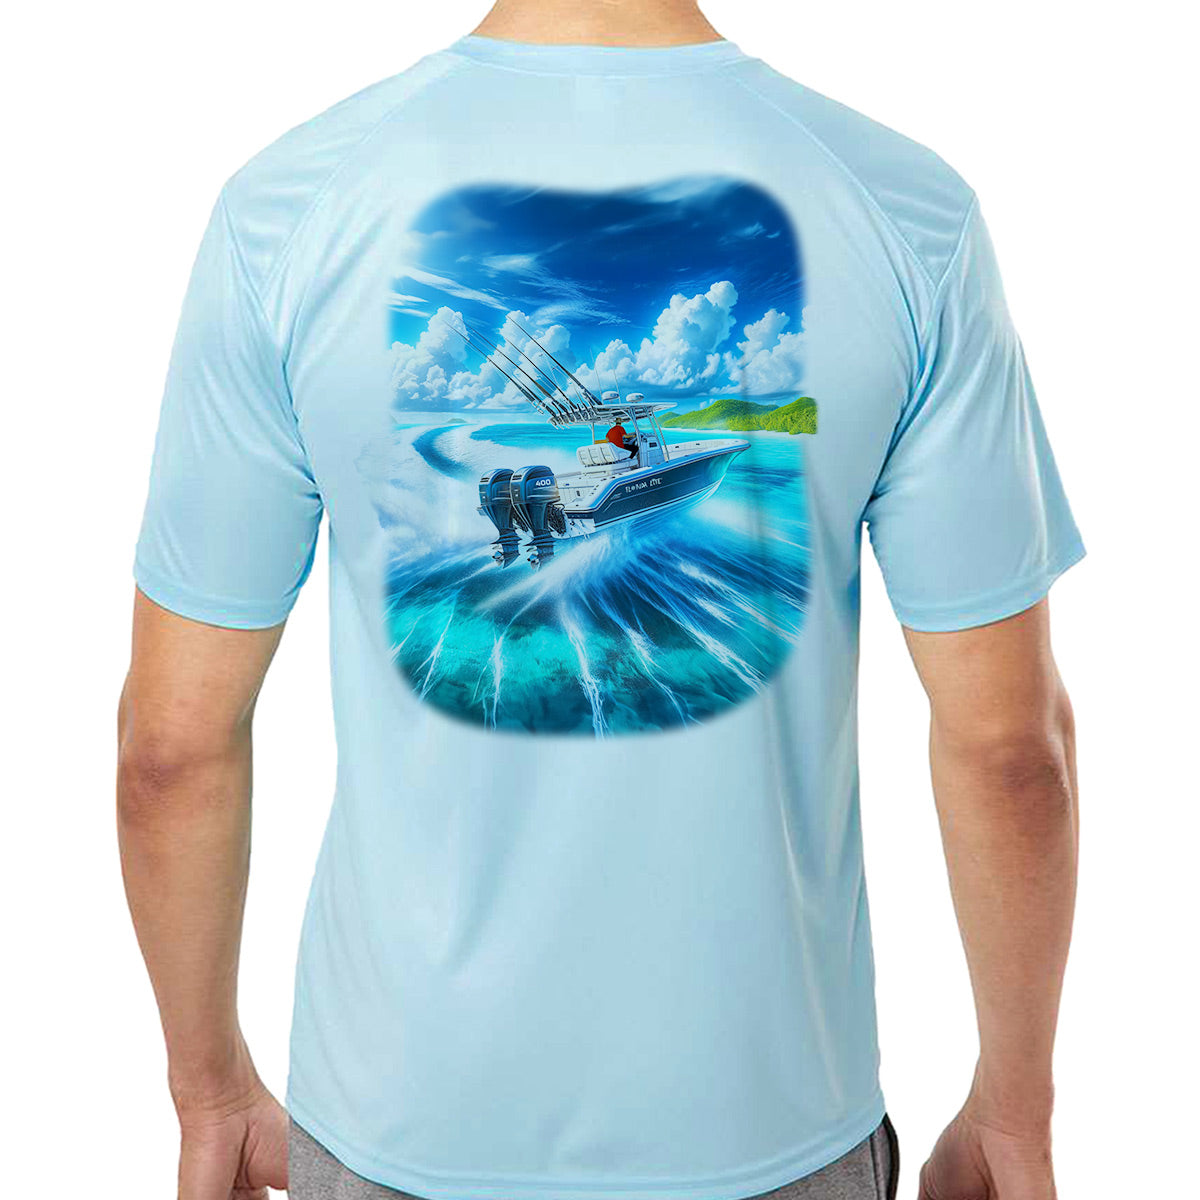 Twin 400's Boating Performance Shirt. Blue